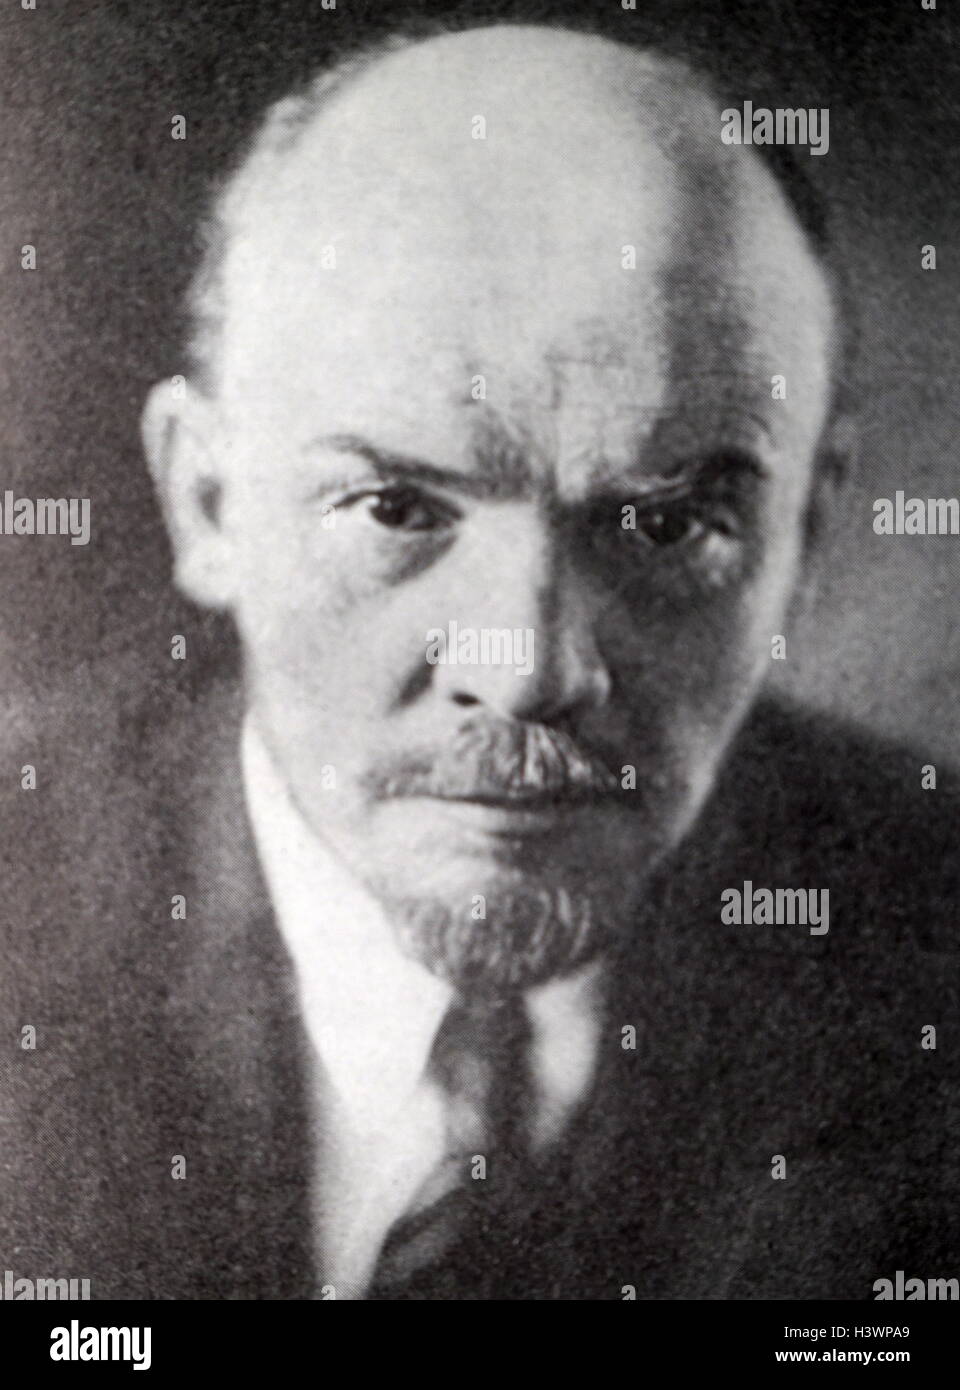 Photograph of Vladimir Lenin (1870-1924) a Russian communist revolutionary politician, political theorist, and head of the government of the Russian Republic, the Russian Soviet Federative Socialist Republic and the Soviet Union. Dated 20th Century Stock Photo